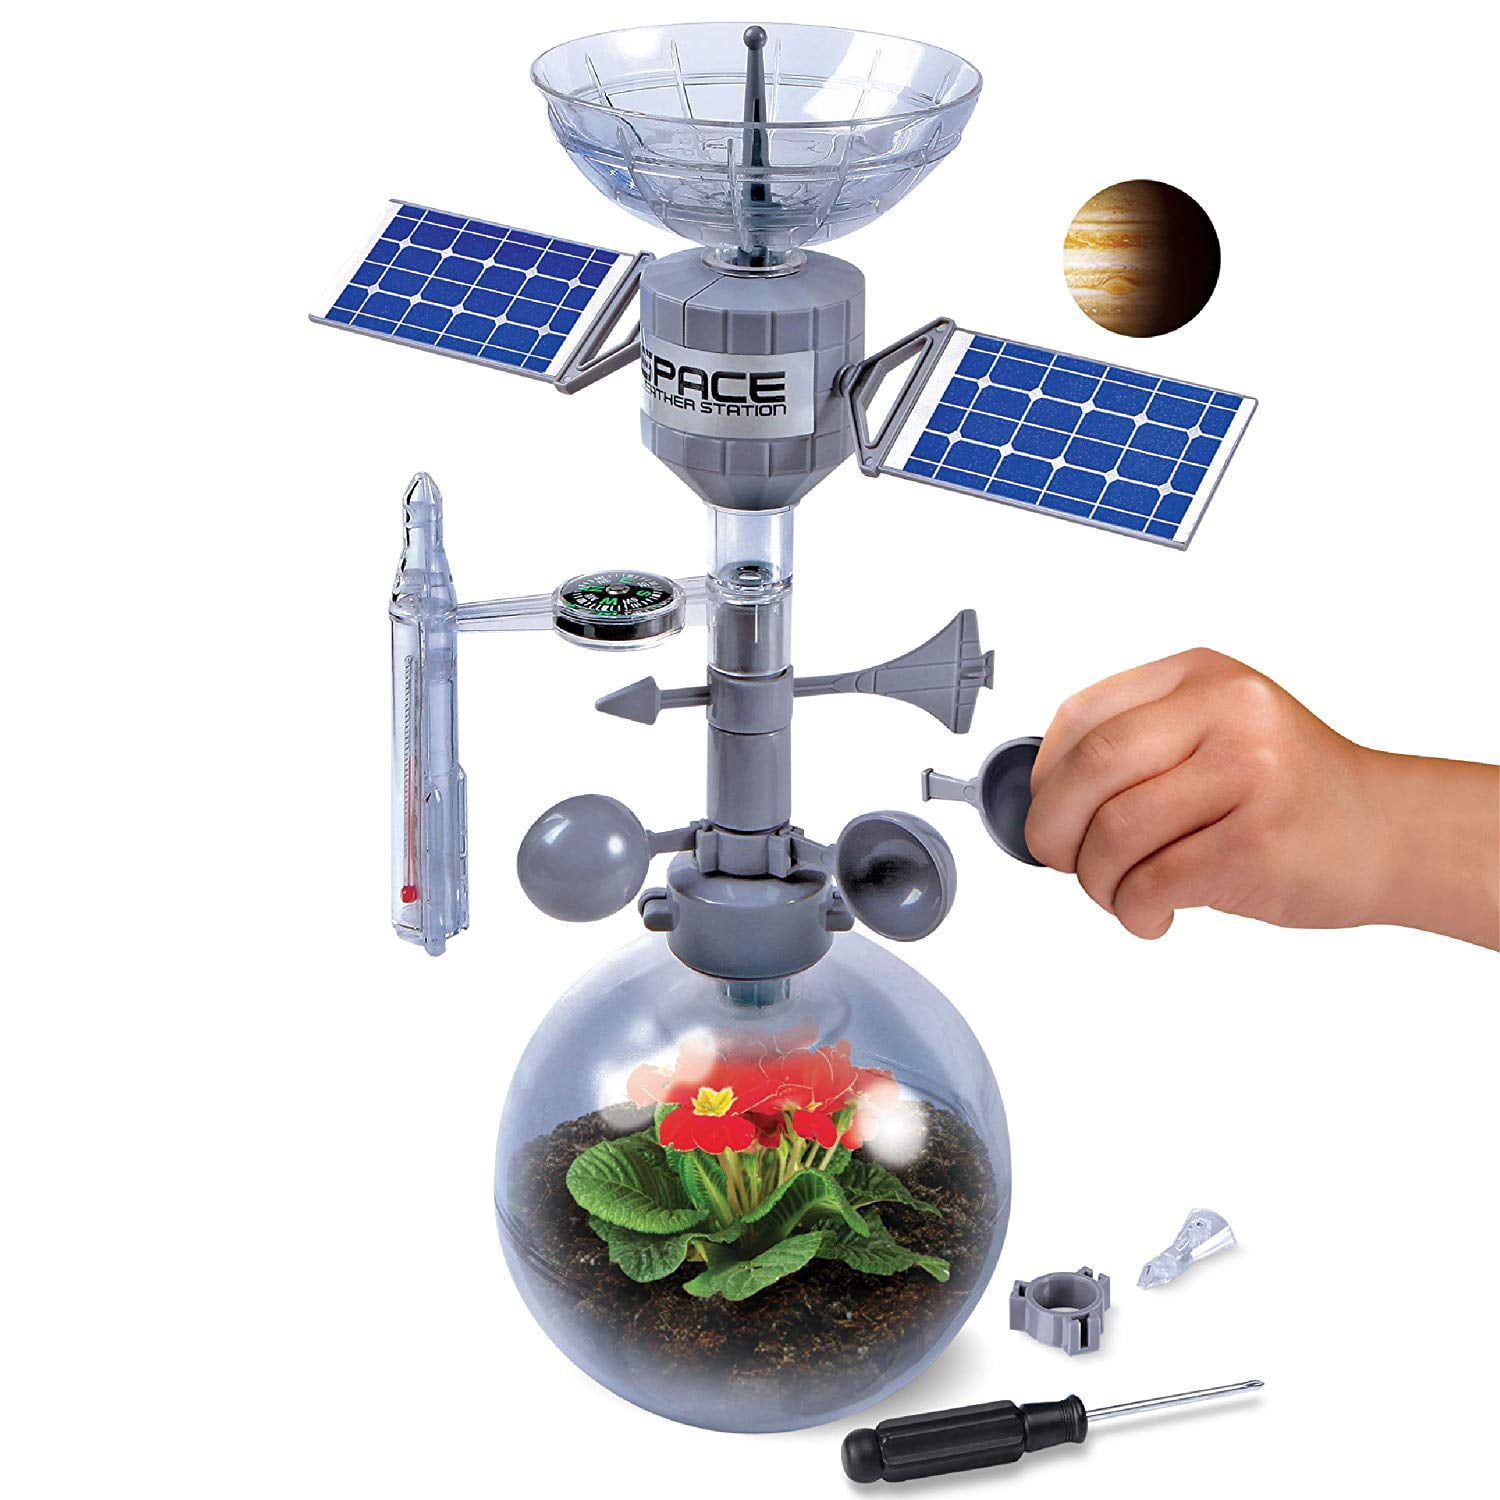 Details about   Discovery #MINDBLOWN Ultimate Science Kit 3-in-1 17-Pc Experiment Set STEM 